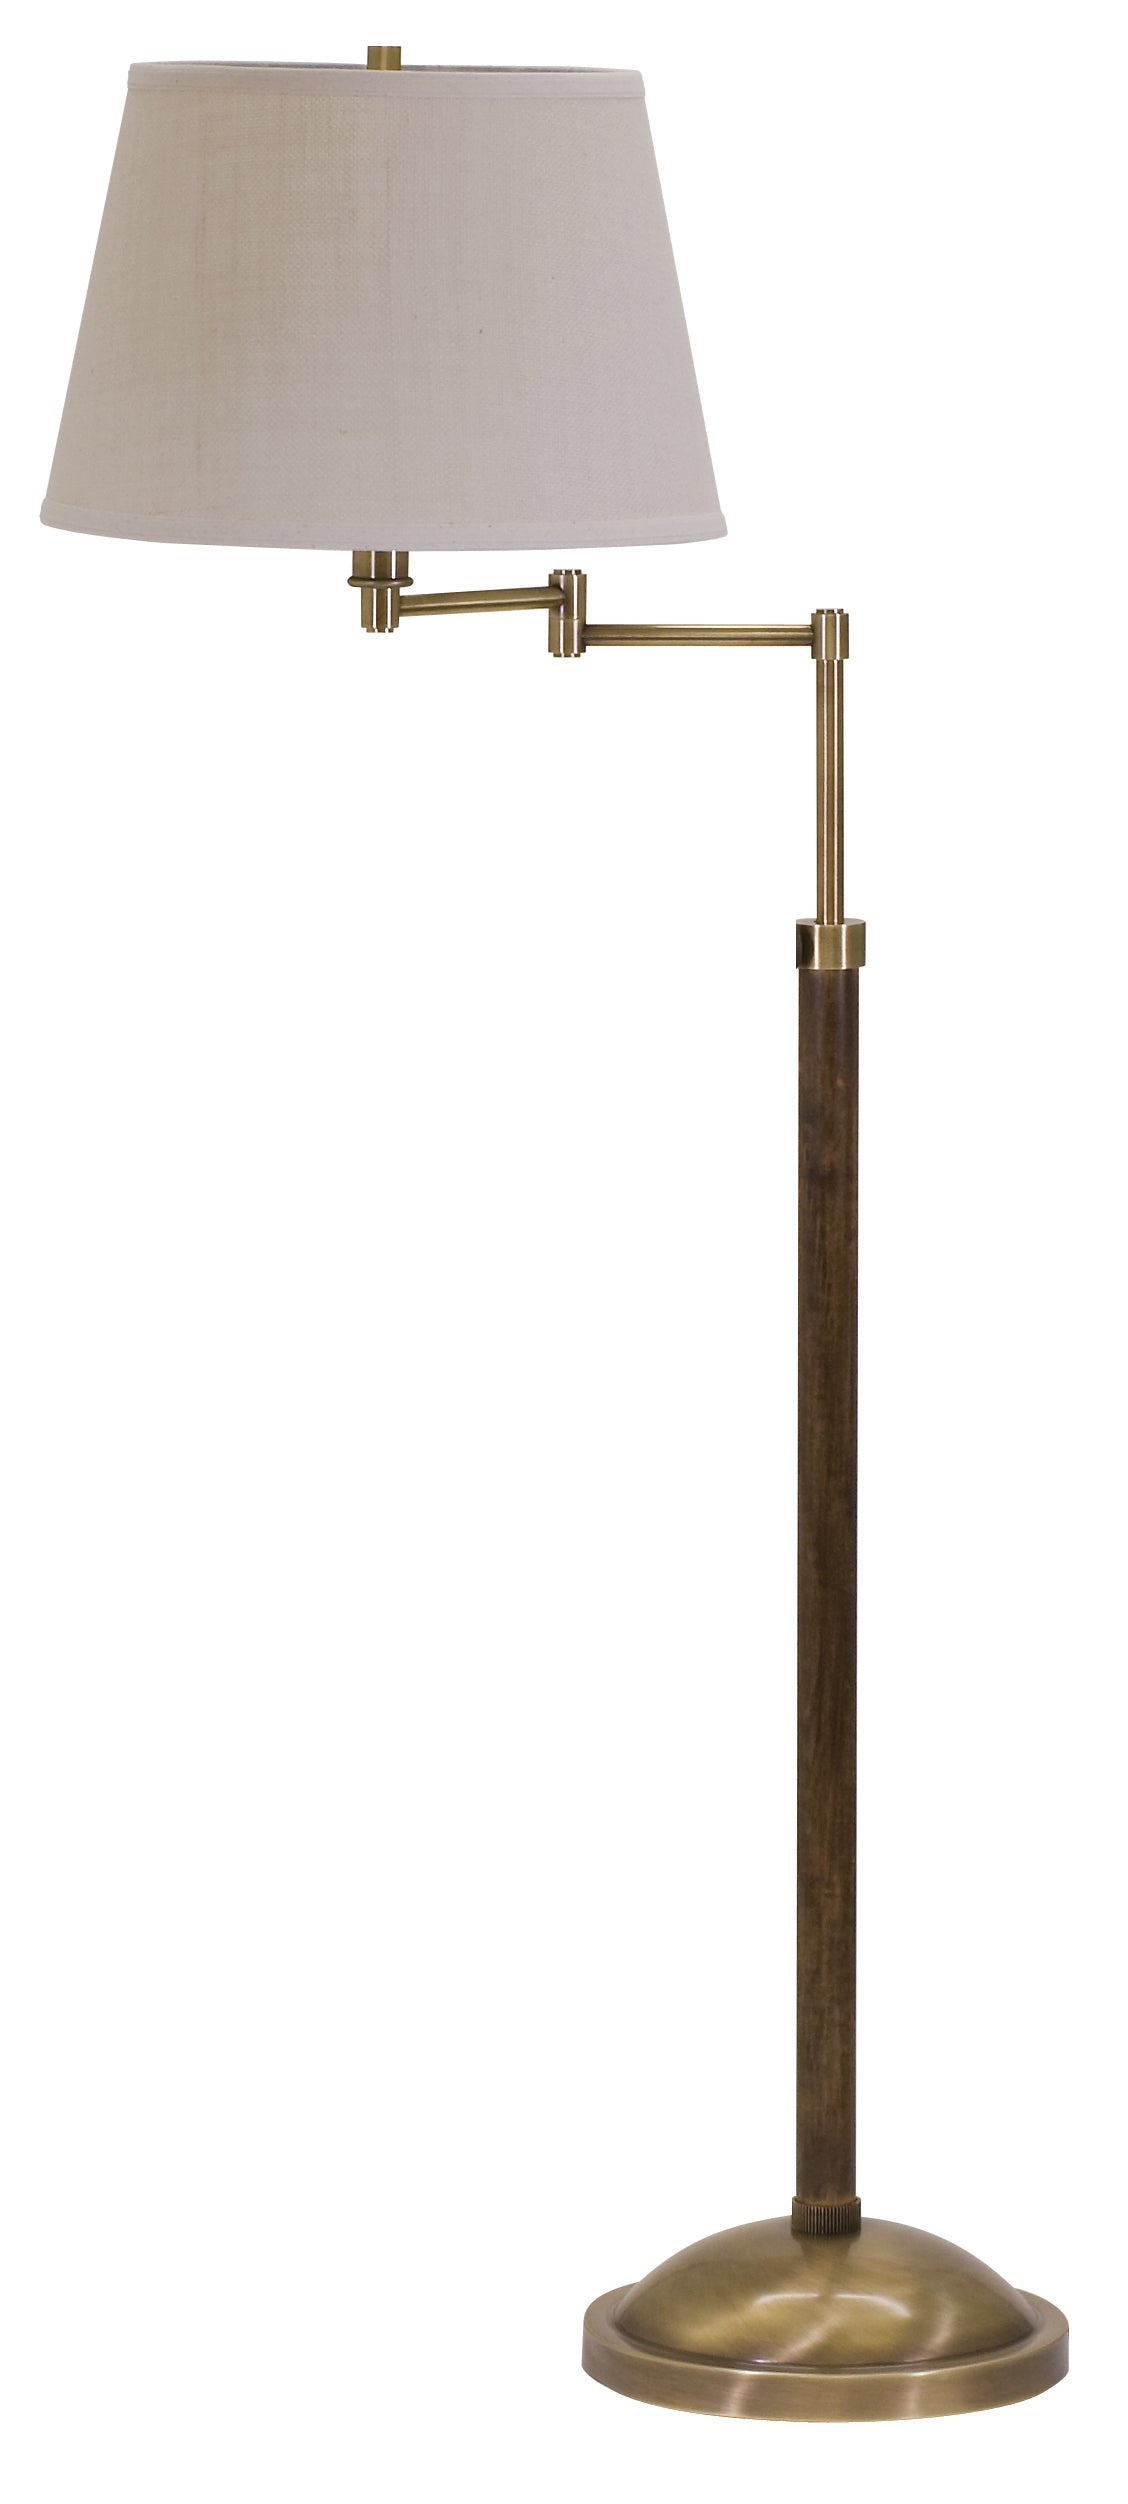 House of Troy Richmond Swing Arm Antique Brass Floor Lamp R401-AB